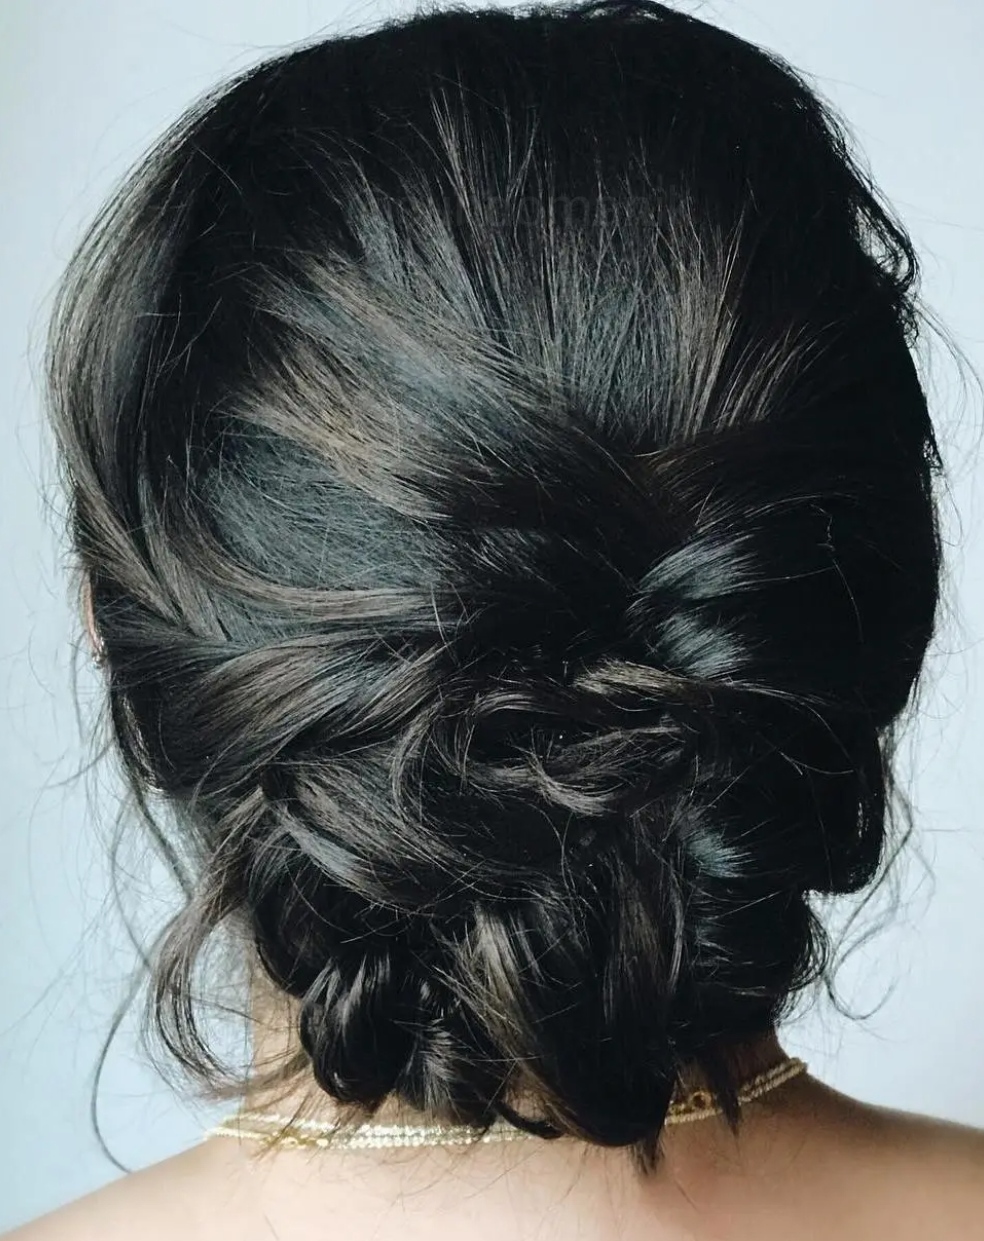 Trendy Updos For Medium-Length Hair You Can Try in 2022, All kinds of women's hair curls